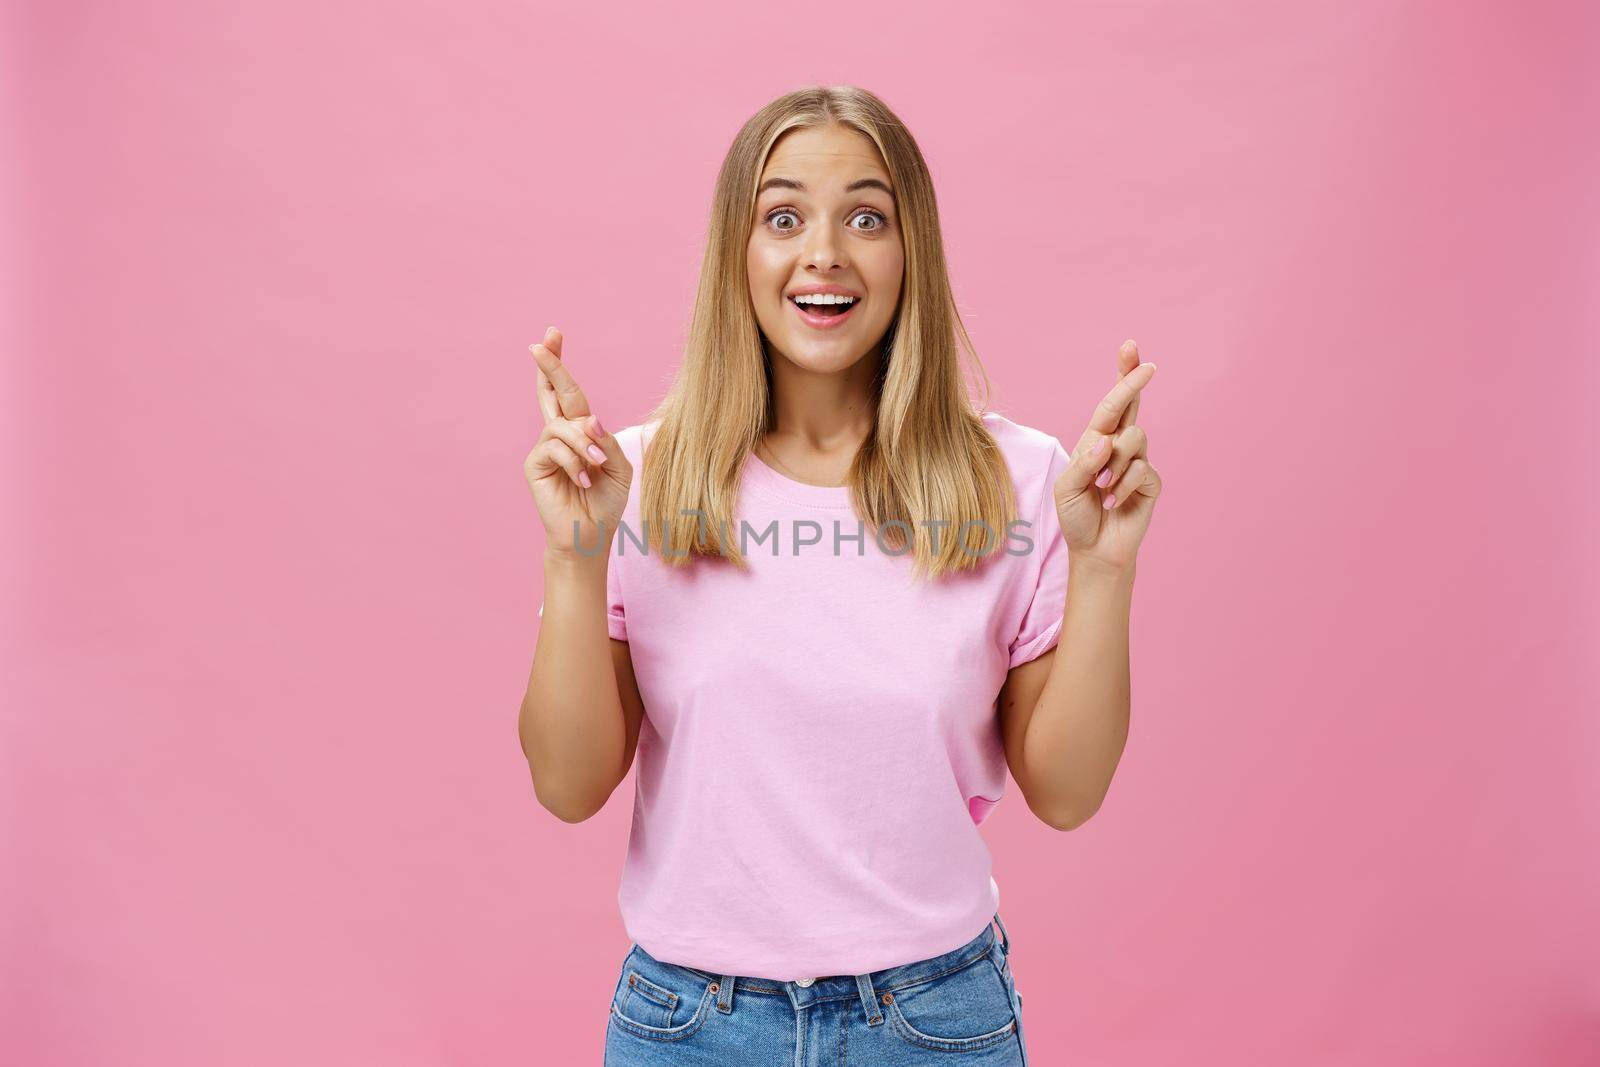 Amused hopeful and delighted attractive female student with tanned skin and blond hair in t-shirt gasping amused and thrilled crossing fingers for good luck wishing and cheering for wish come true. Body language concept